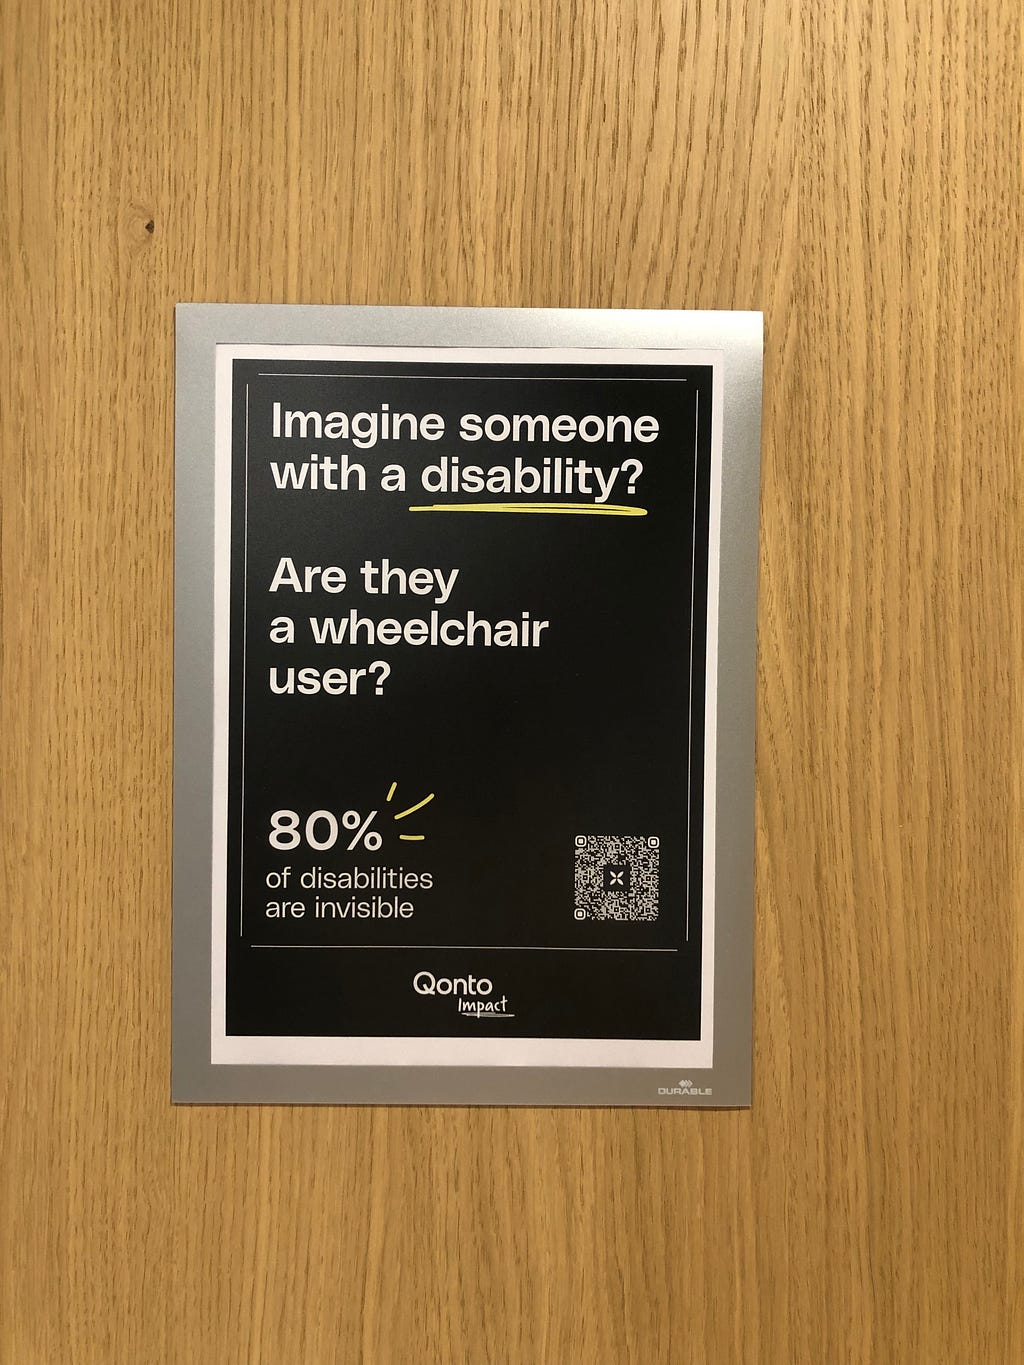 Poster on an office wall with an eye-catching headline: “Imagine someone with a disability”. The next line reads: “Are they a wheelchair user?” The final line reads: “80% of disabilities are invisible”. The poster is signed “Qonto Impact”.